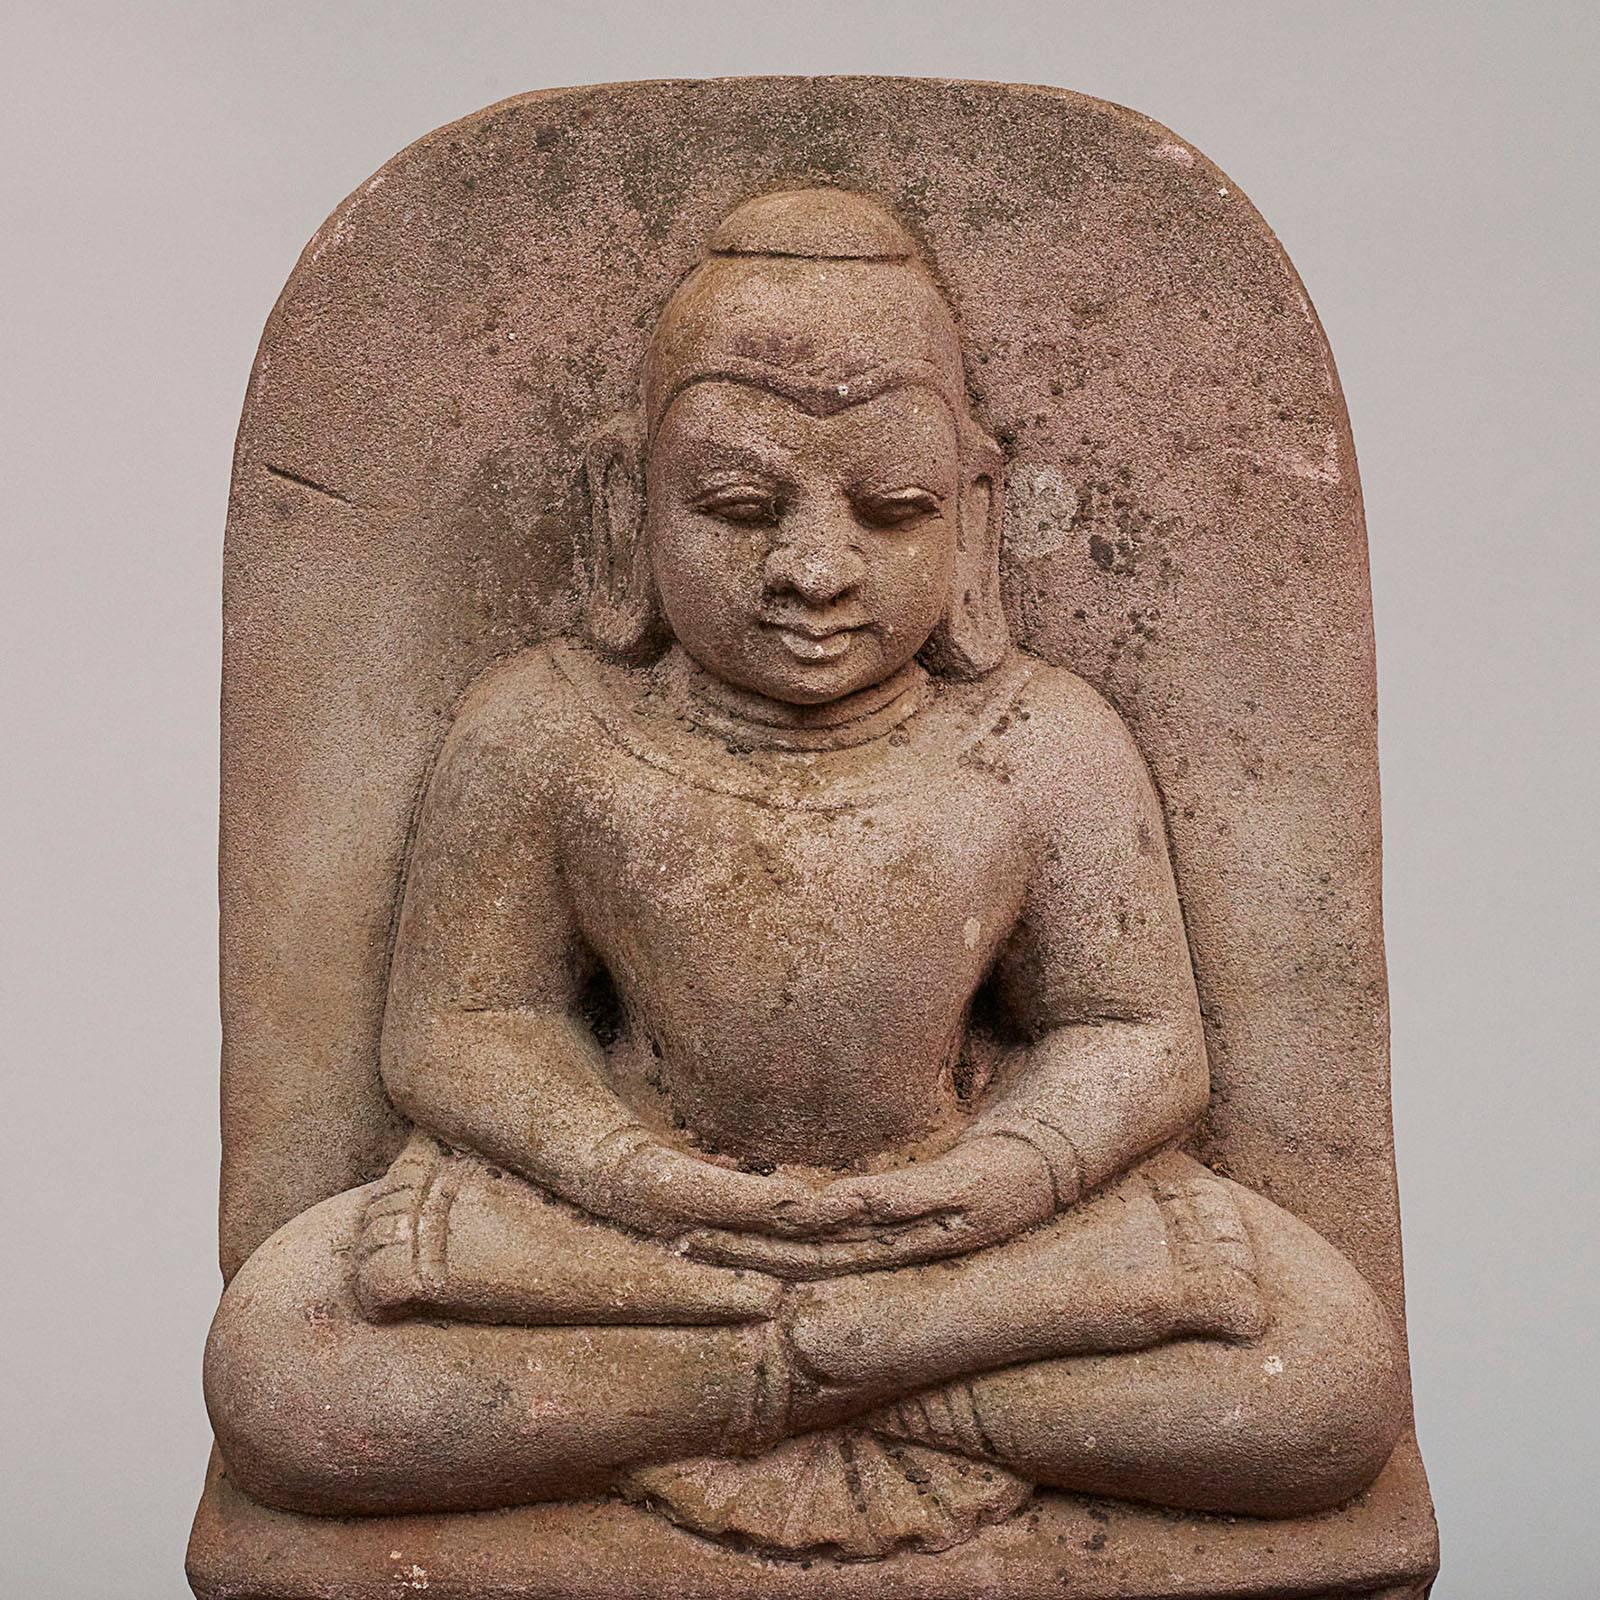 A powerful carved sandstone Burmese Buddha, circa 1600-1700.
In meditation with crossed legs and arms referred to as 